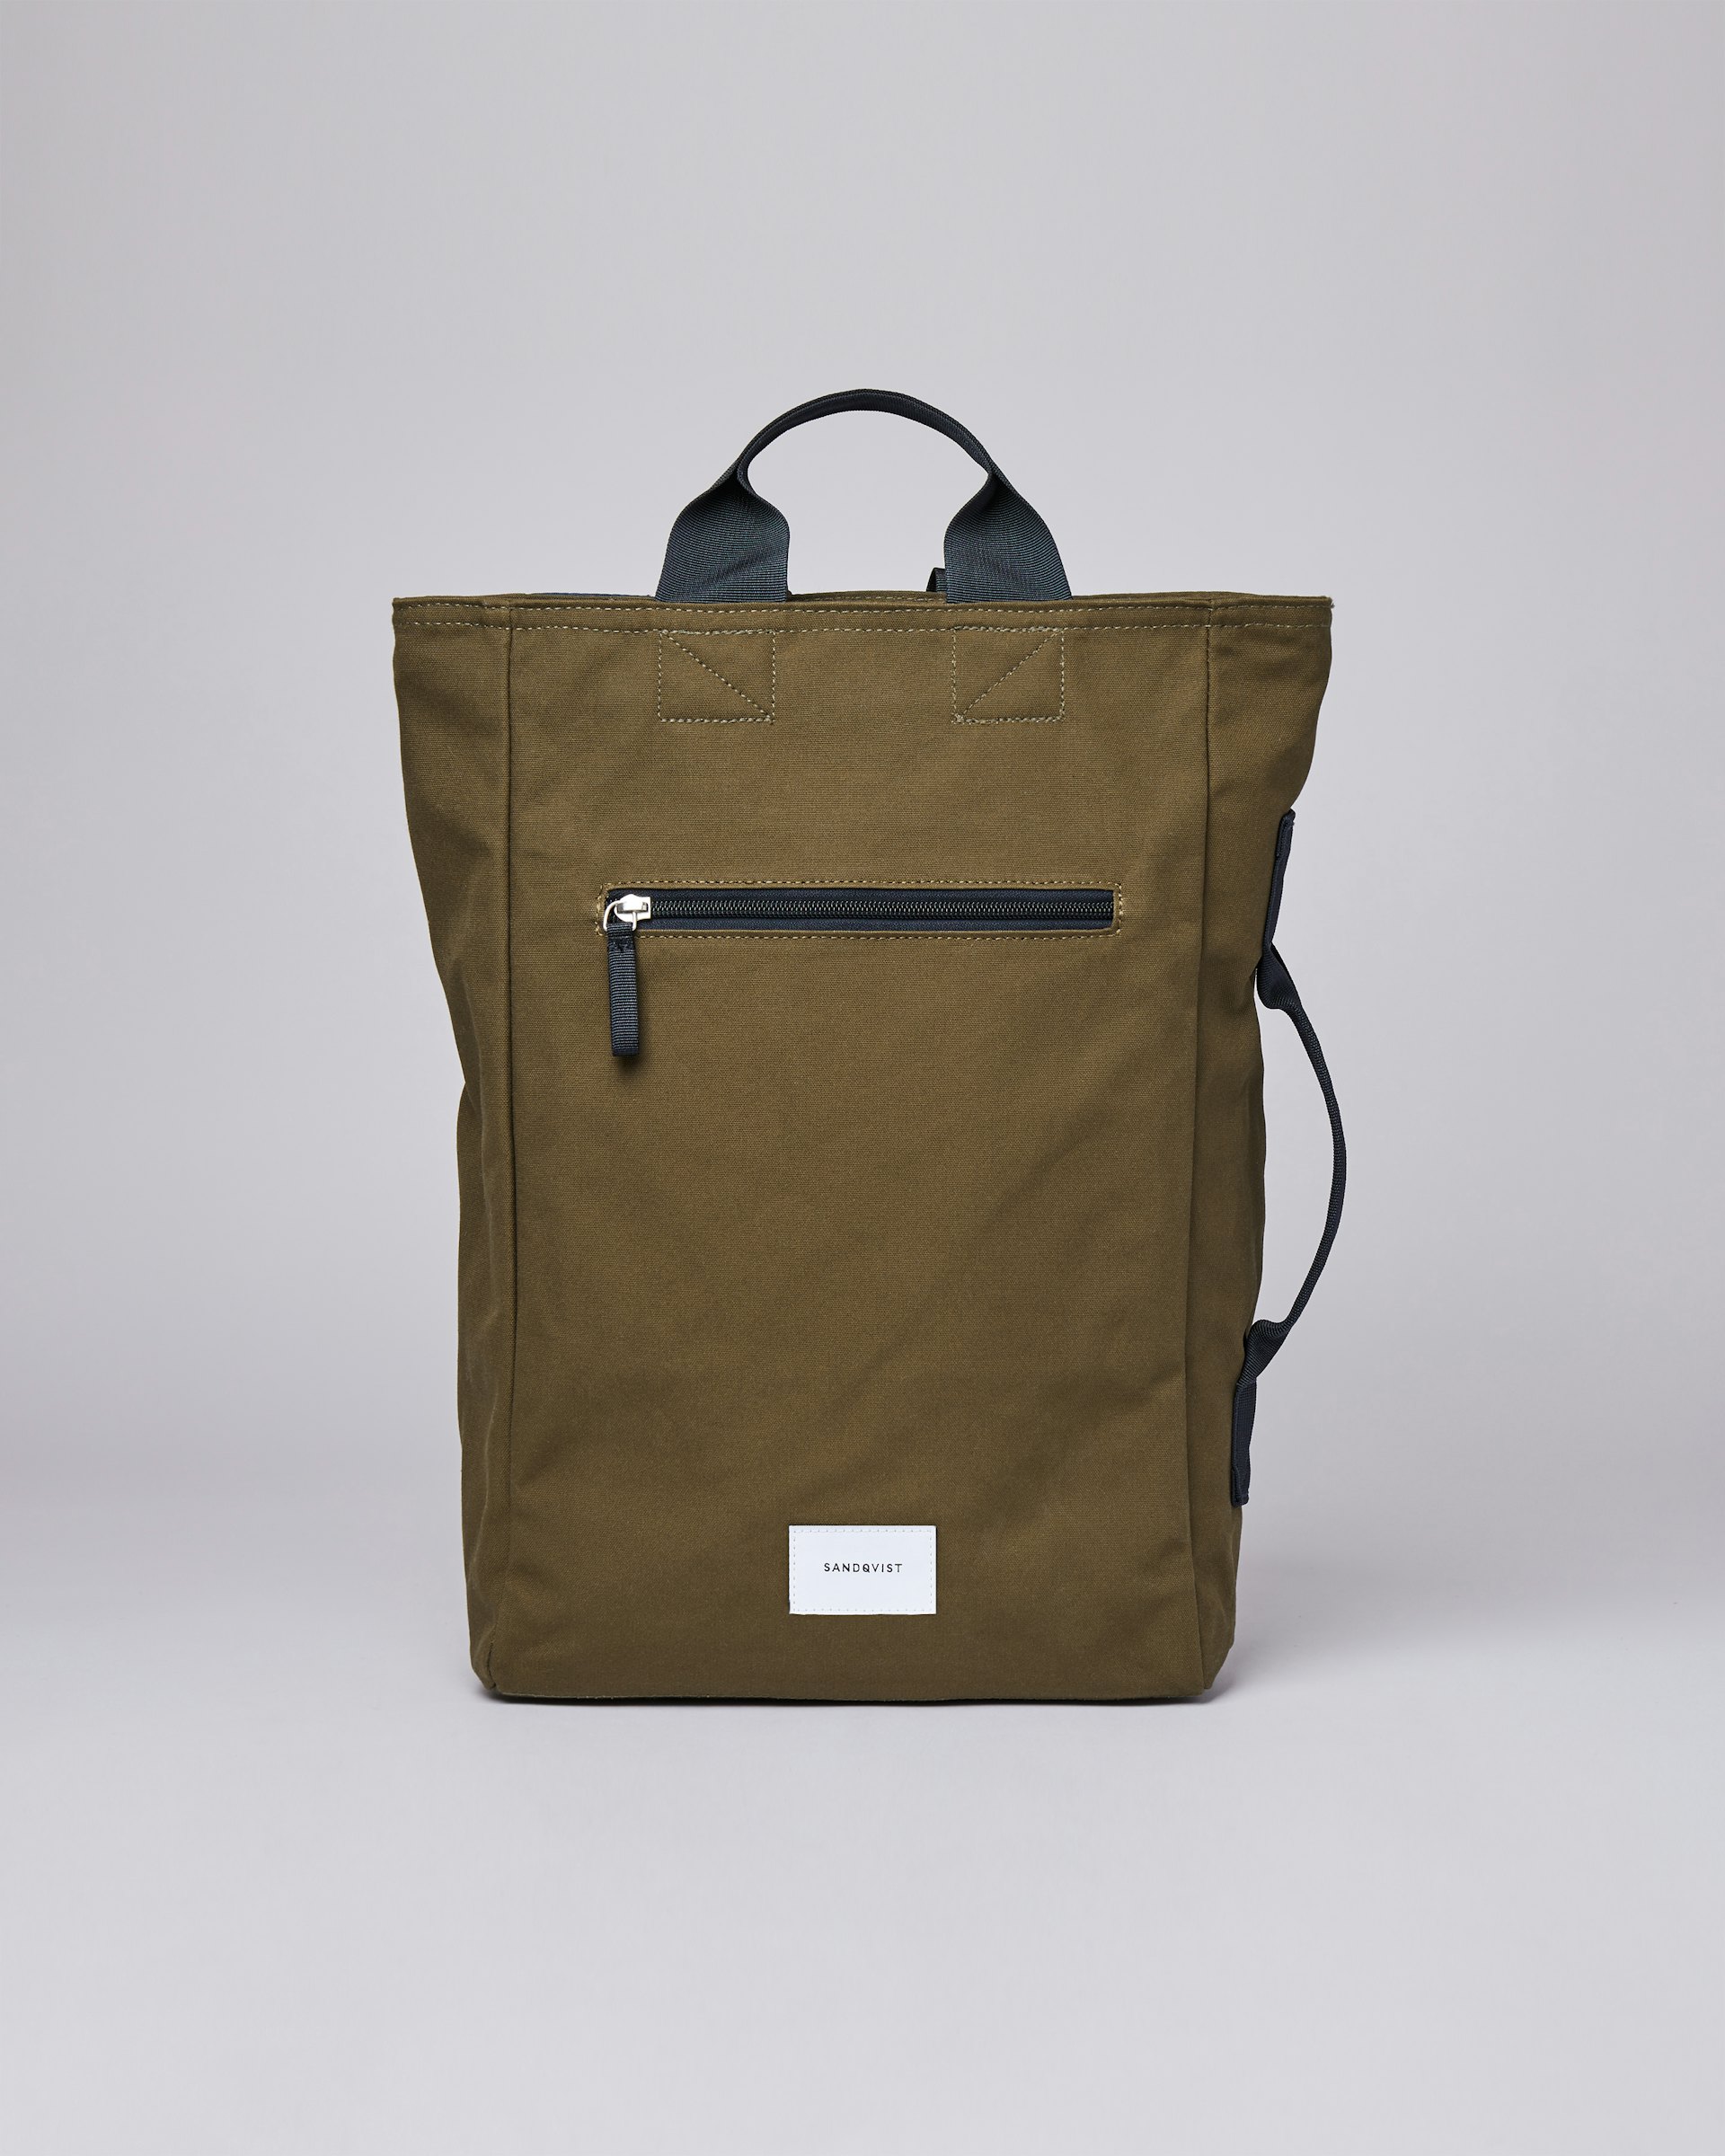 Tony Vegan belongs to the category Backpacks and is in color olive